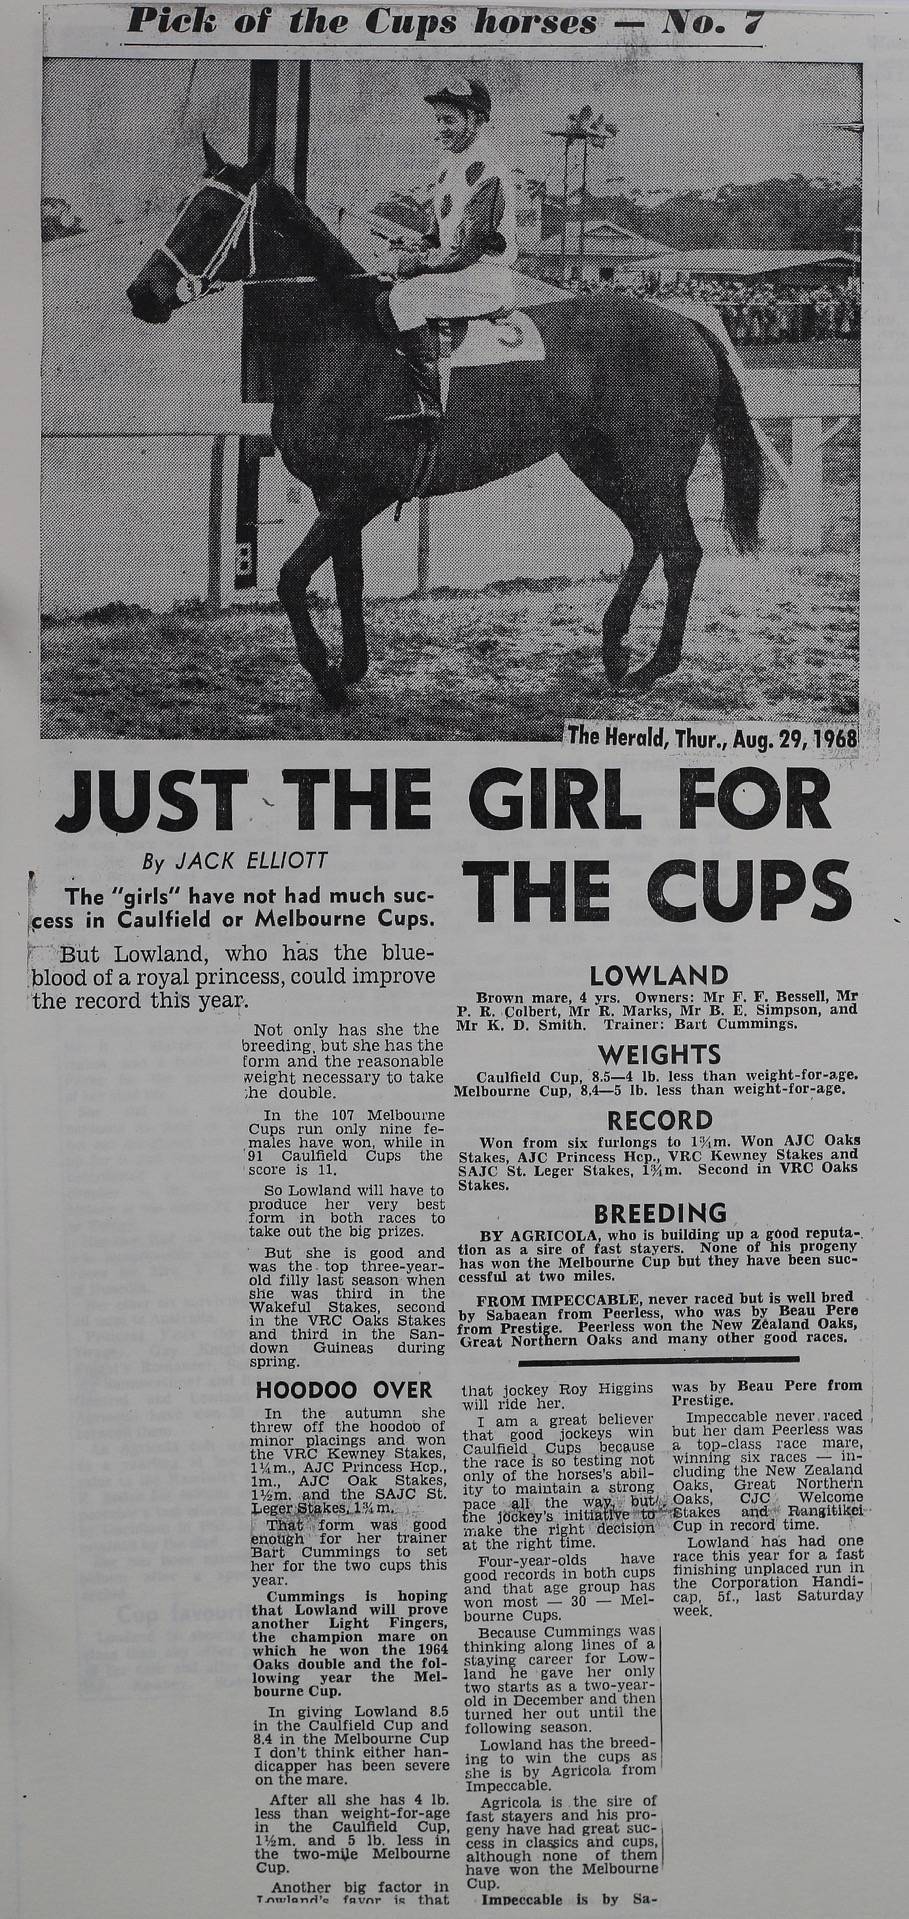 Just the girl for the cups